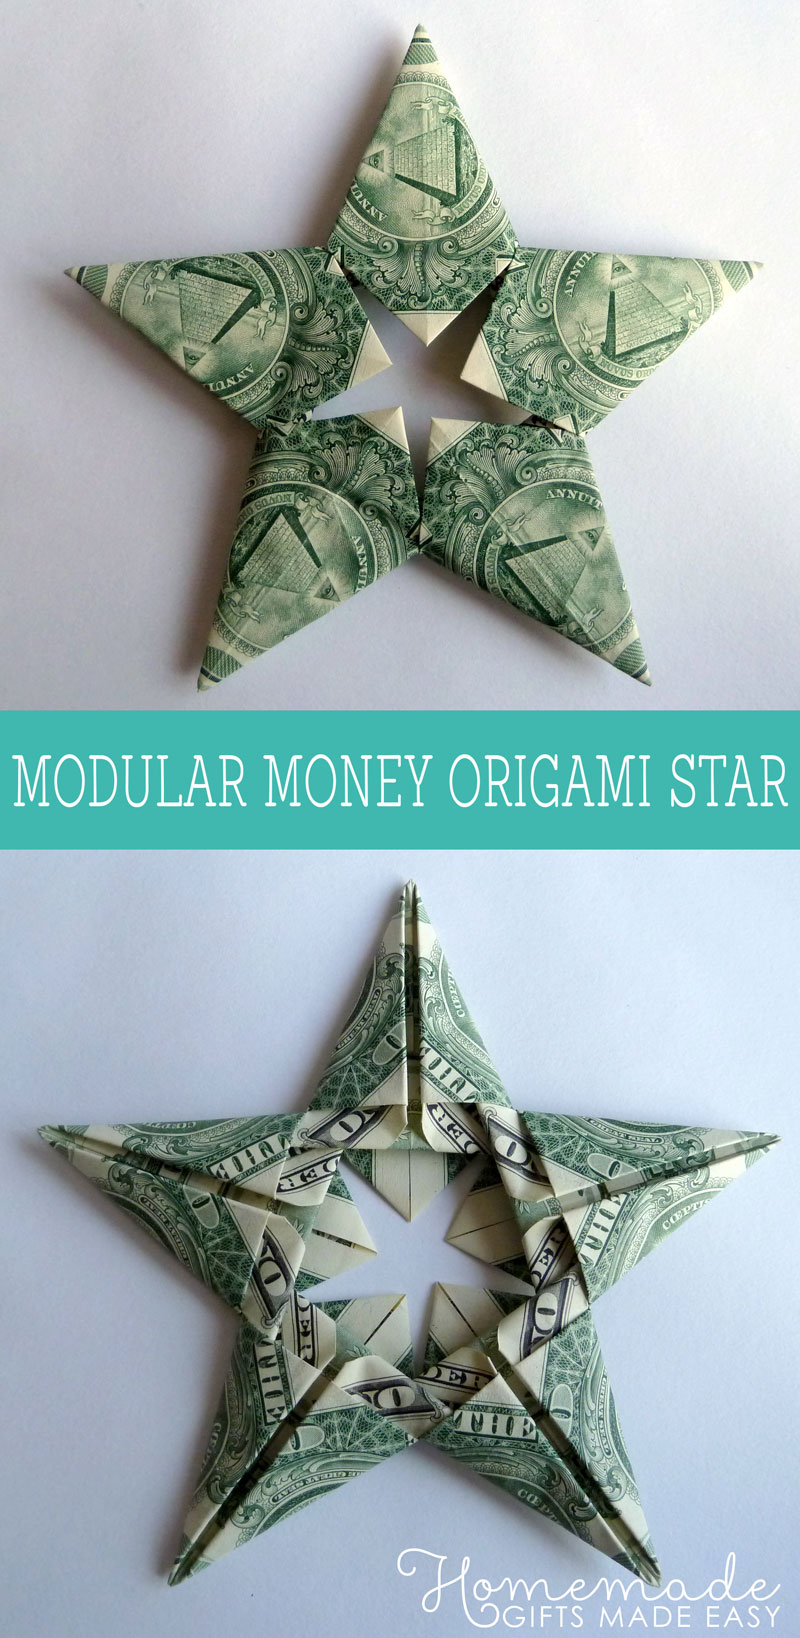 How To Make Origami Money Lei Modular Money Origami Star From 5 Bills How To Fold Step Step